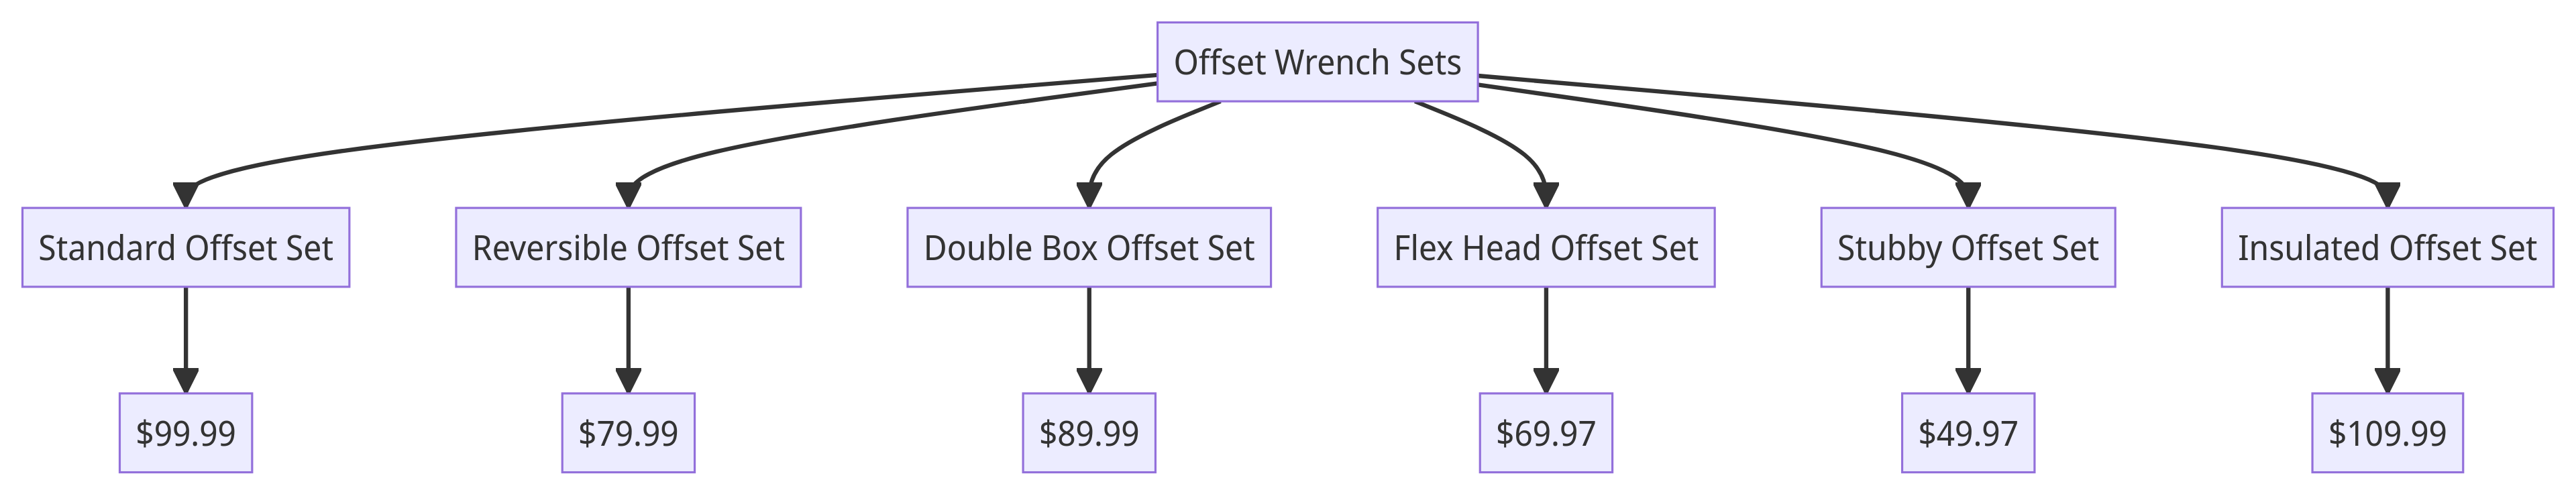 Offset Wrench Set Flow Chart